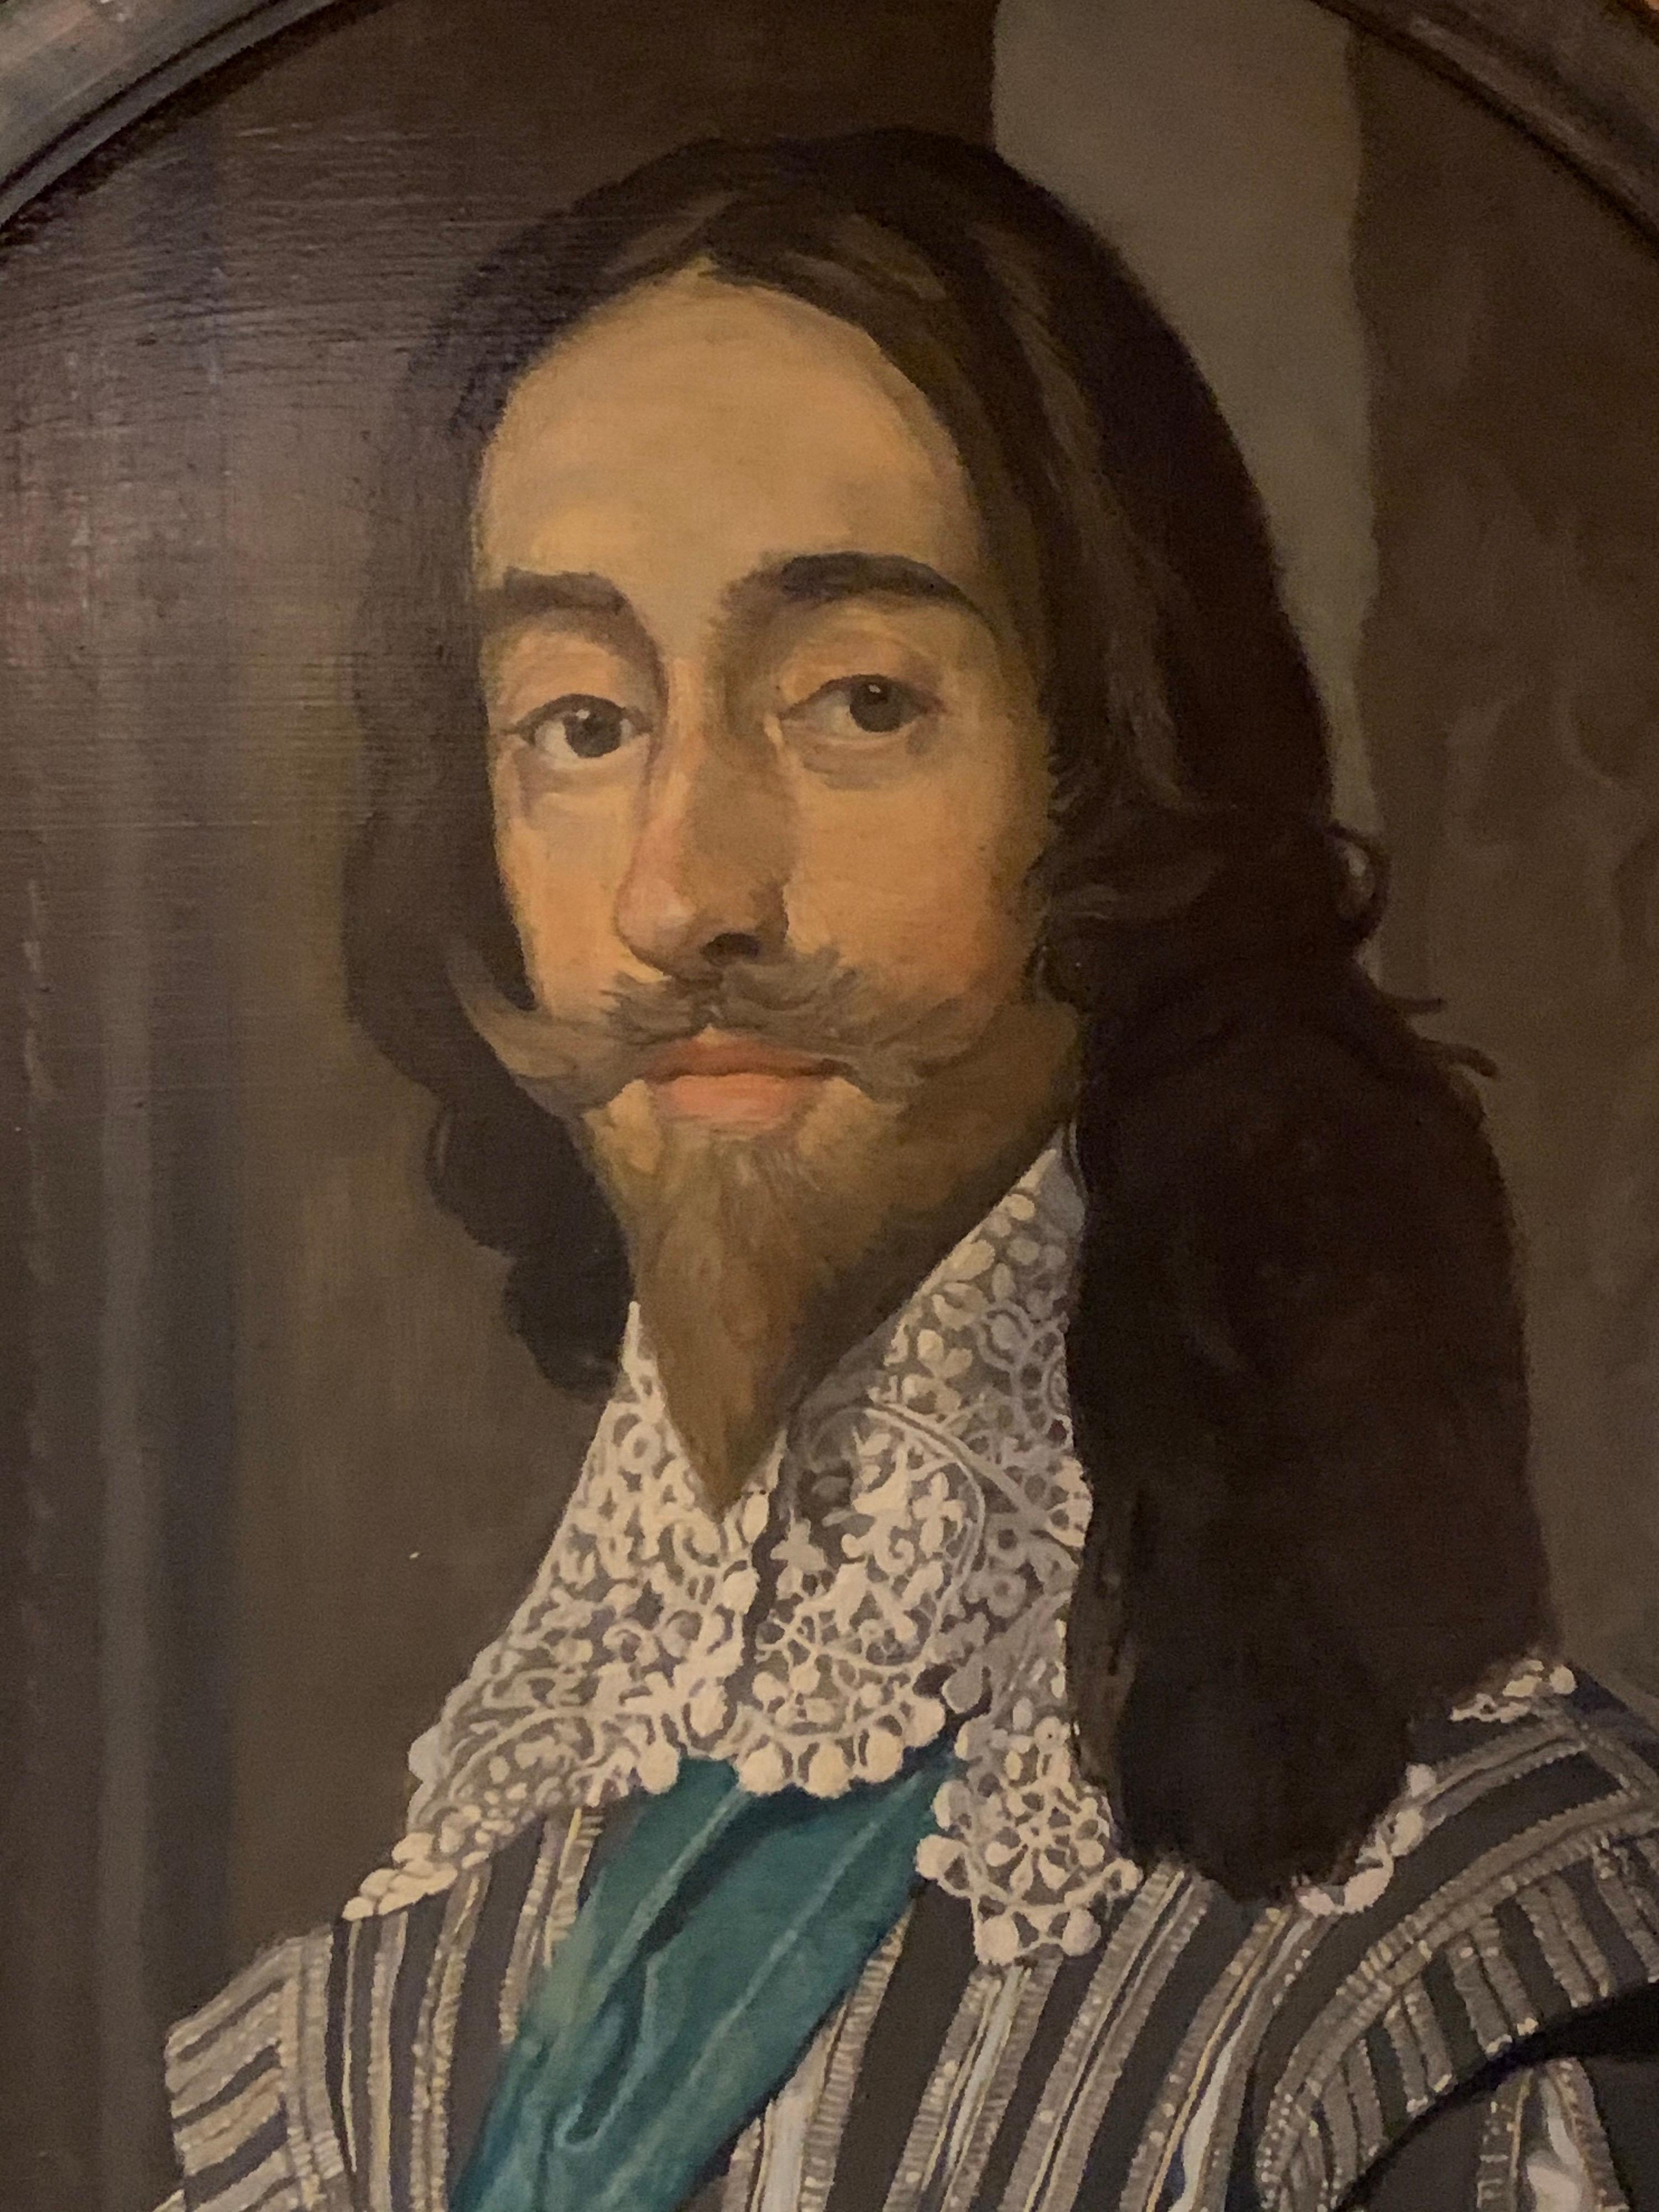 King Charles I of England, Scotland and Ireland
British School, early 20th century
oil painting on wood panel, framed
panel: 28.5 x 24 inches
framed: 36 x 32 inches
provenance: private UK collection

Beautifully decorative British oil painting